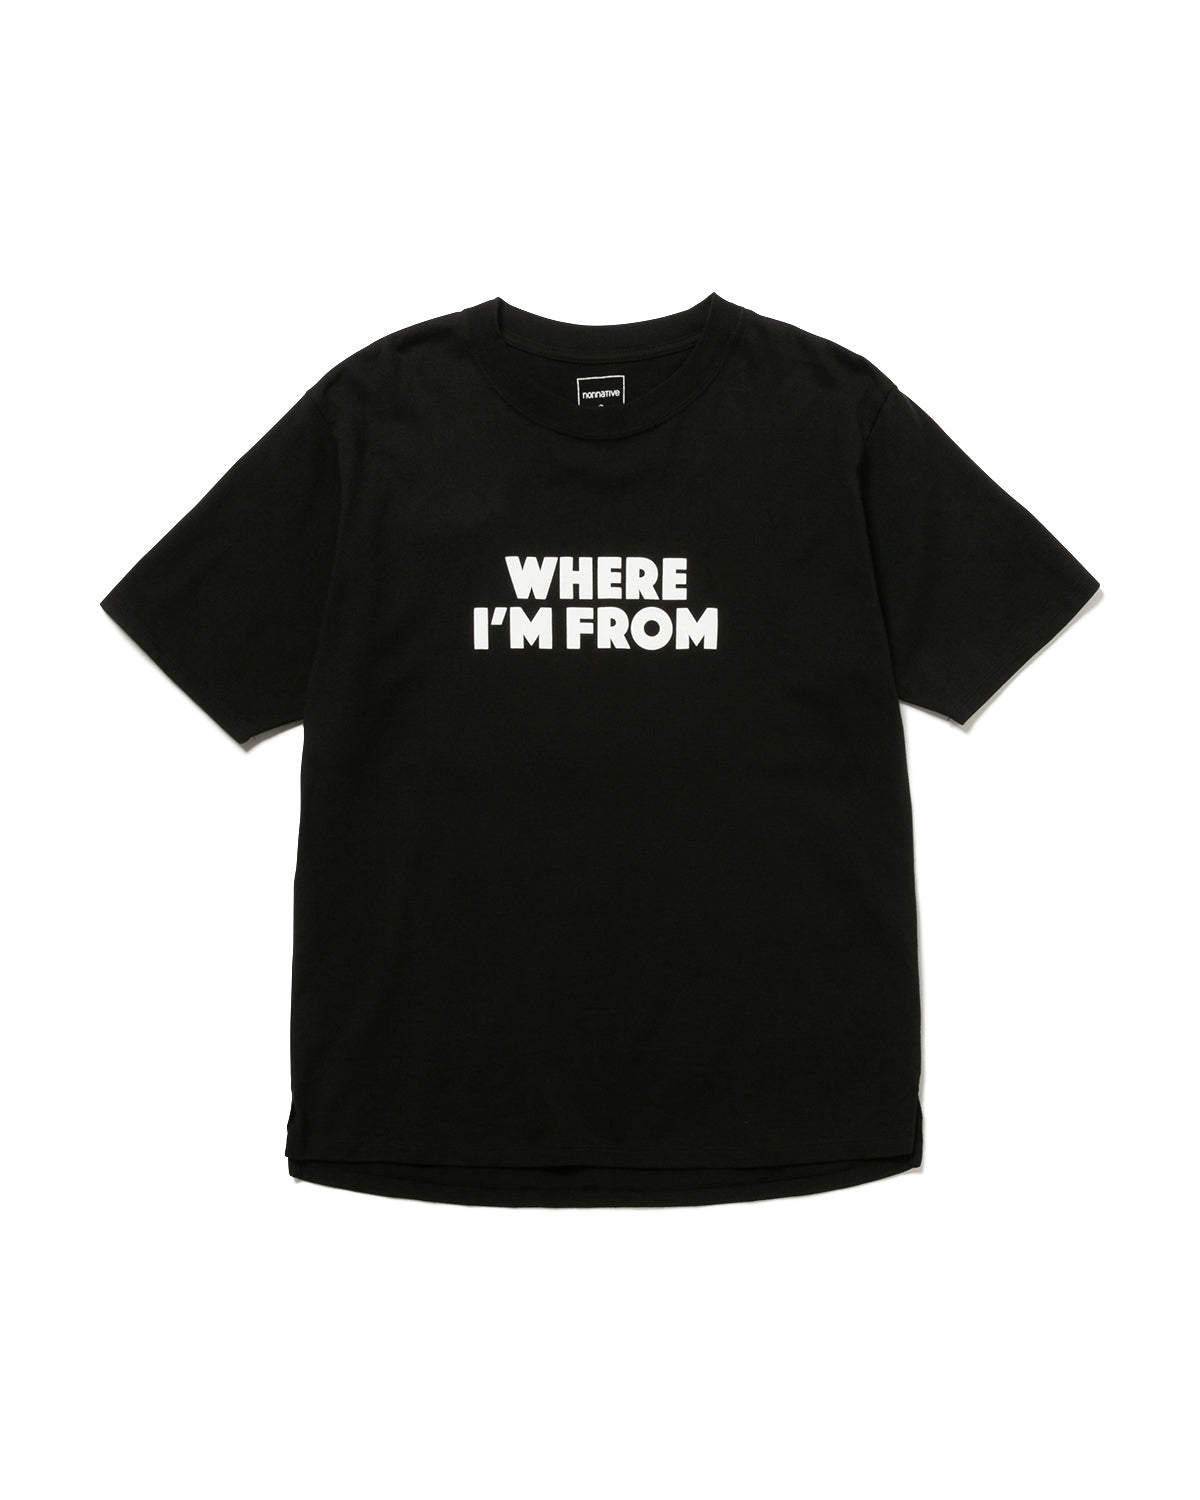 Dweller S/S Tee "WHERE I'M FROM"